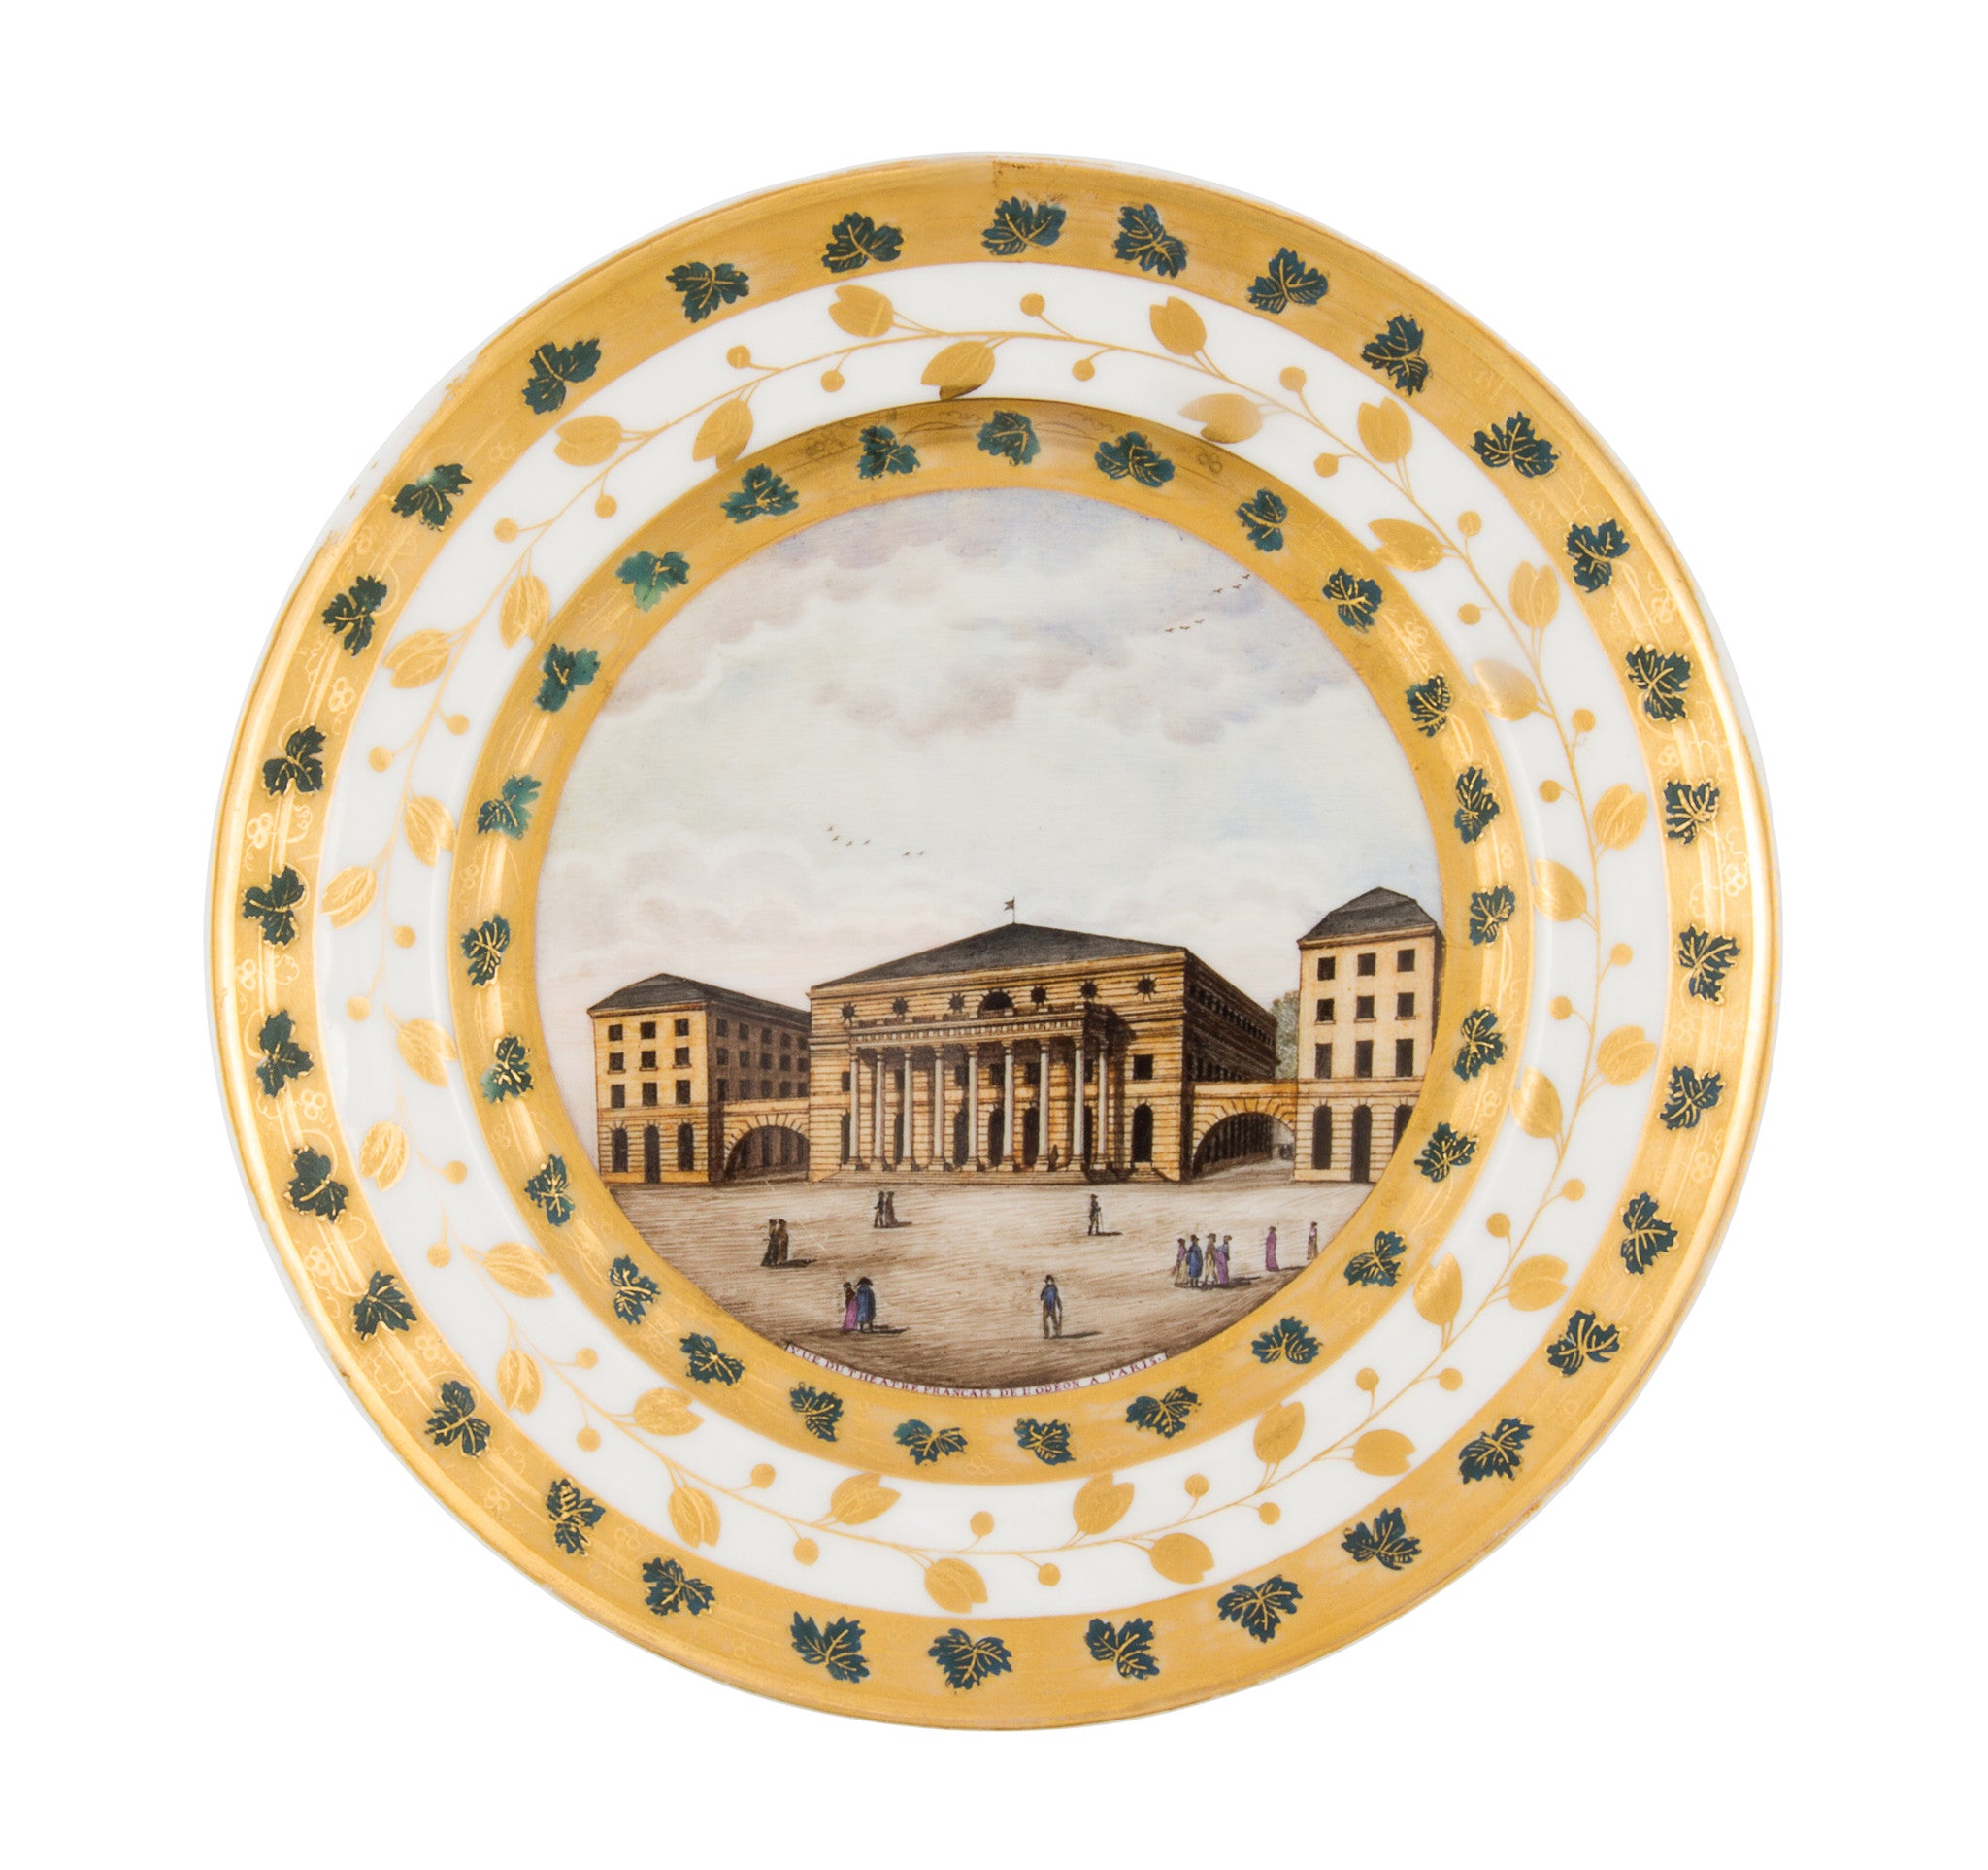 SOLD French Paris Porcelain Cabinet Plate, View of the Paris Opera